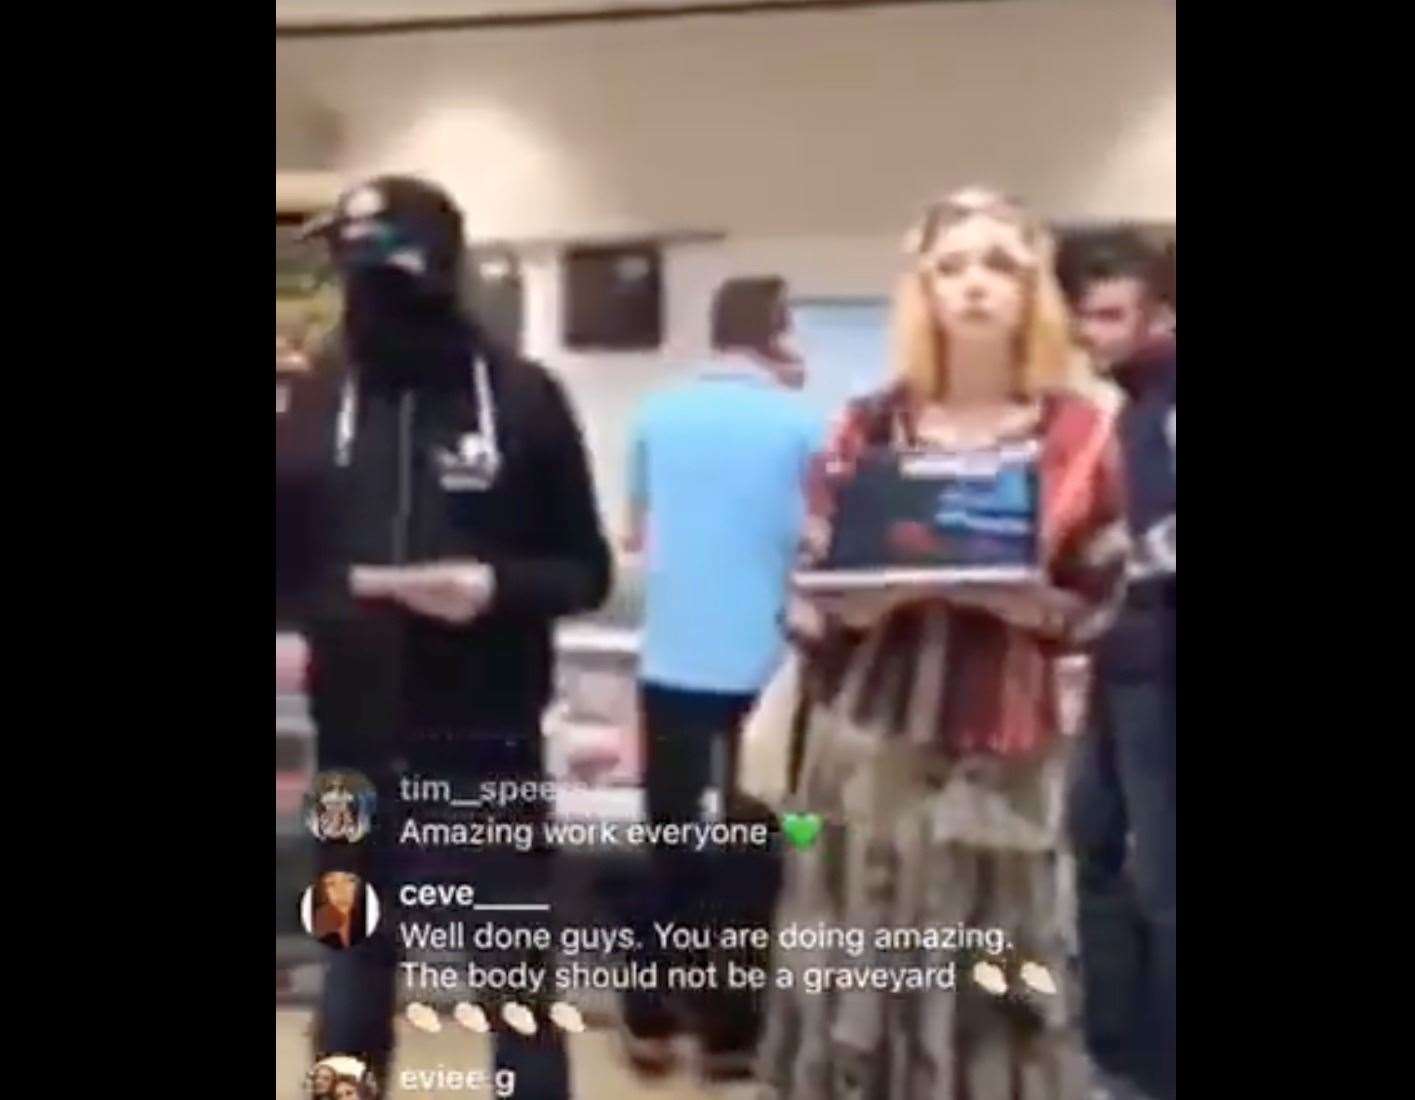 Claire Folan and friends staged a protest at the meat counter in Canterbury Sainsbury's (8911852)